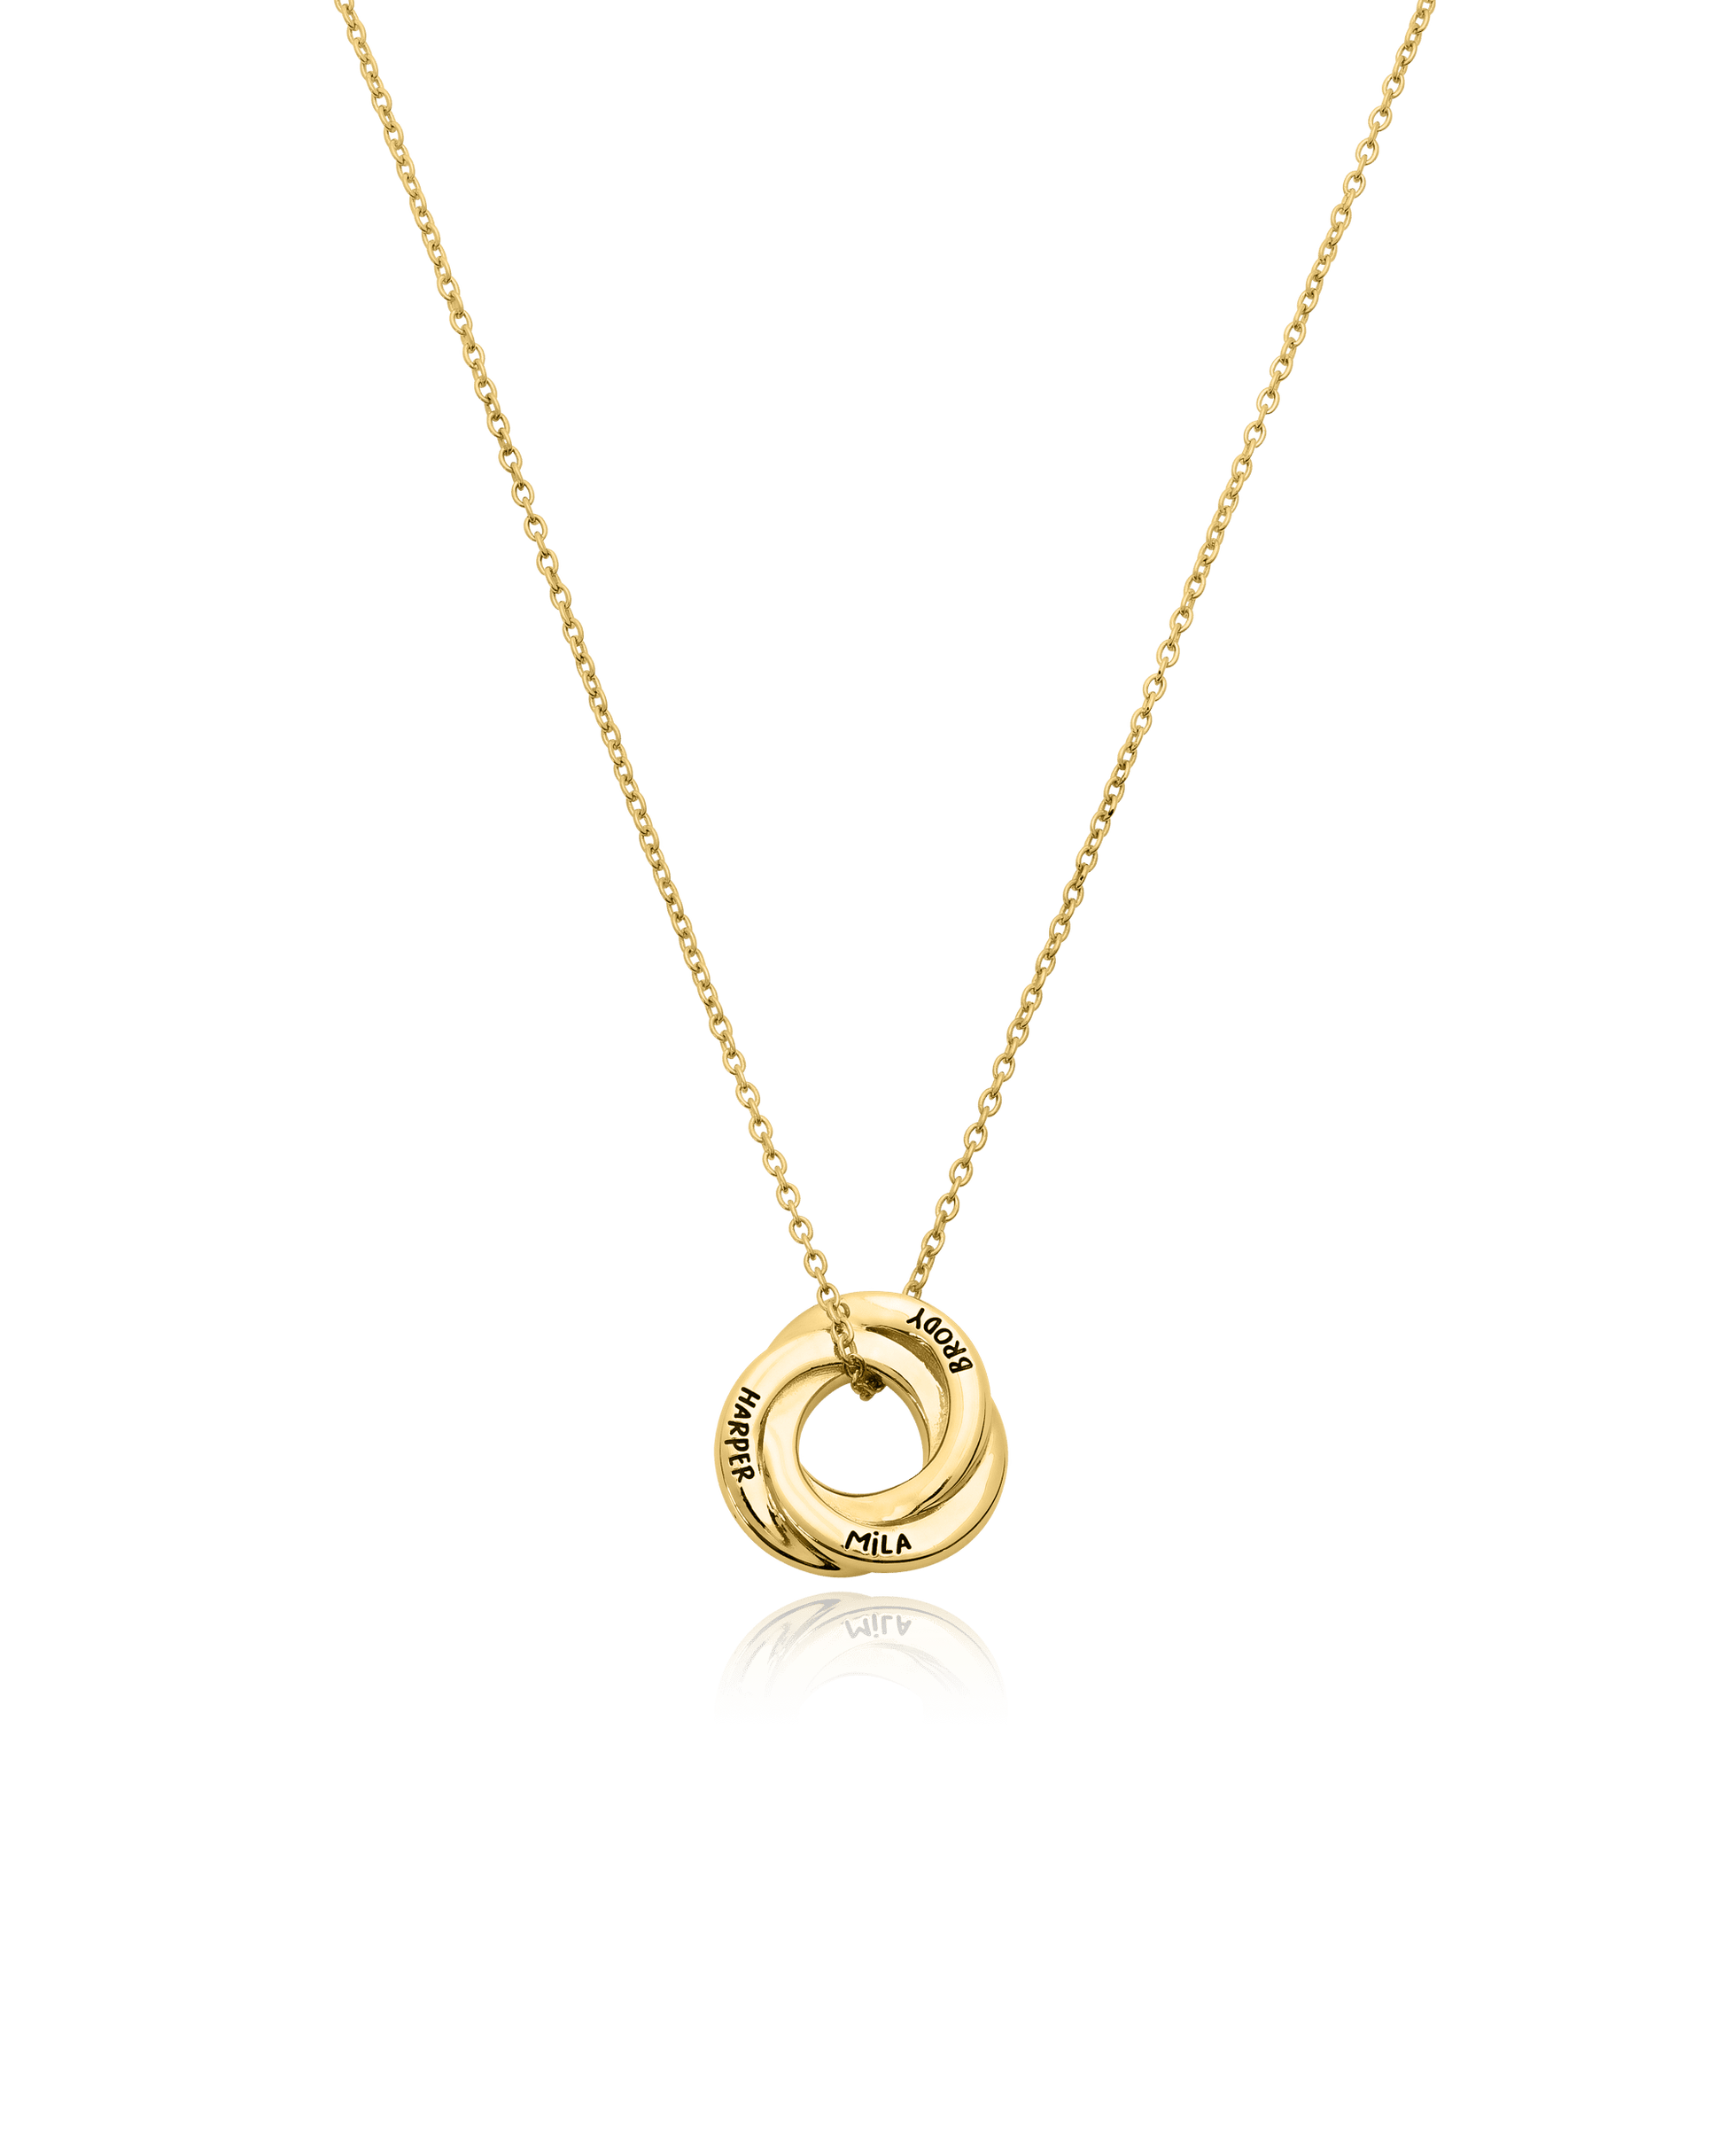 Russian Ring Necklace - 18K Gold Vermeil Necklaces magal-dev 16” 